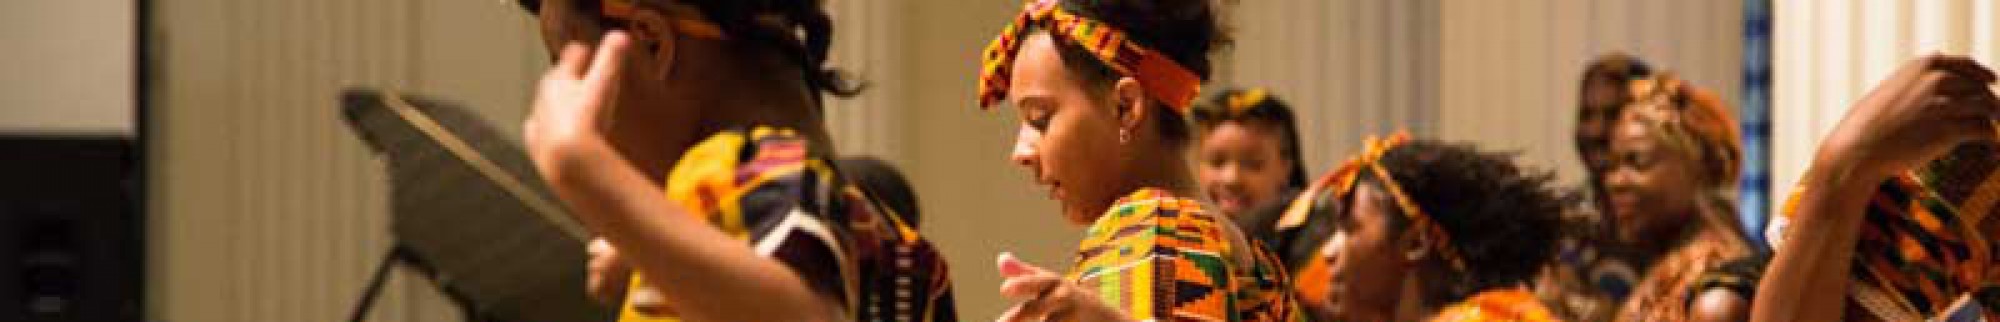 African Road Gala & Banquet 2015 – Let's make a difference together